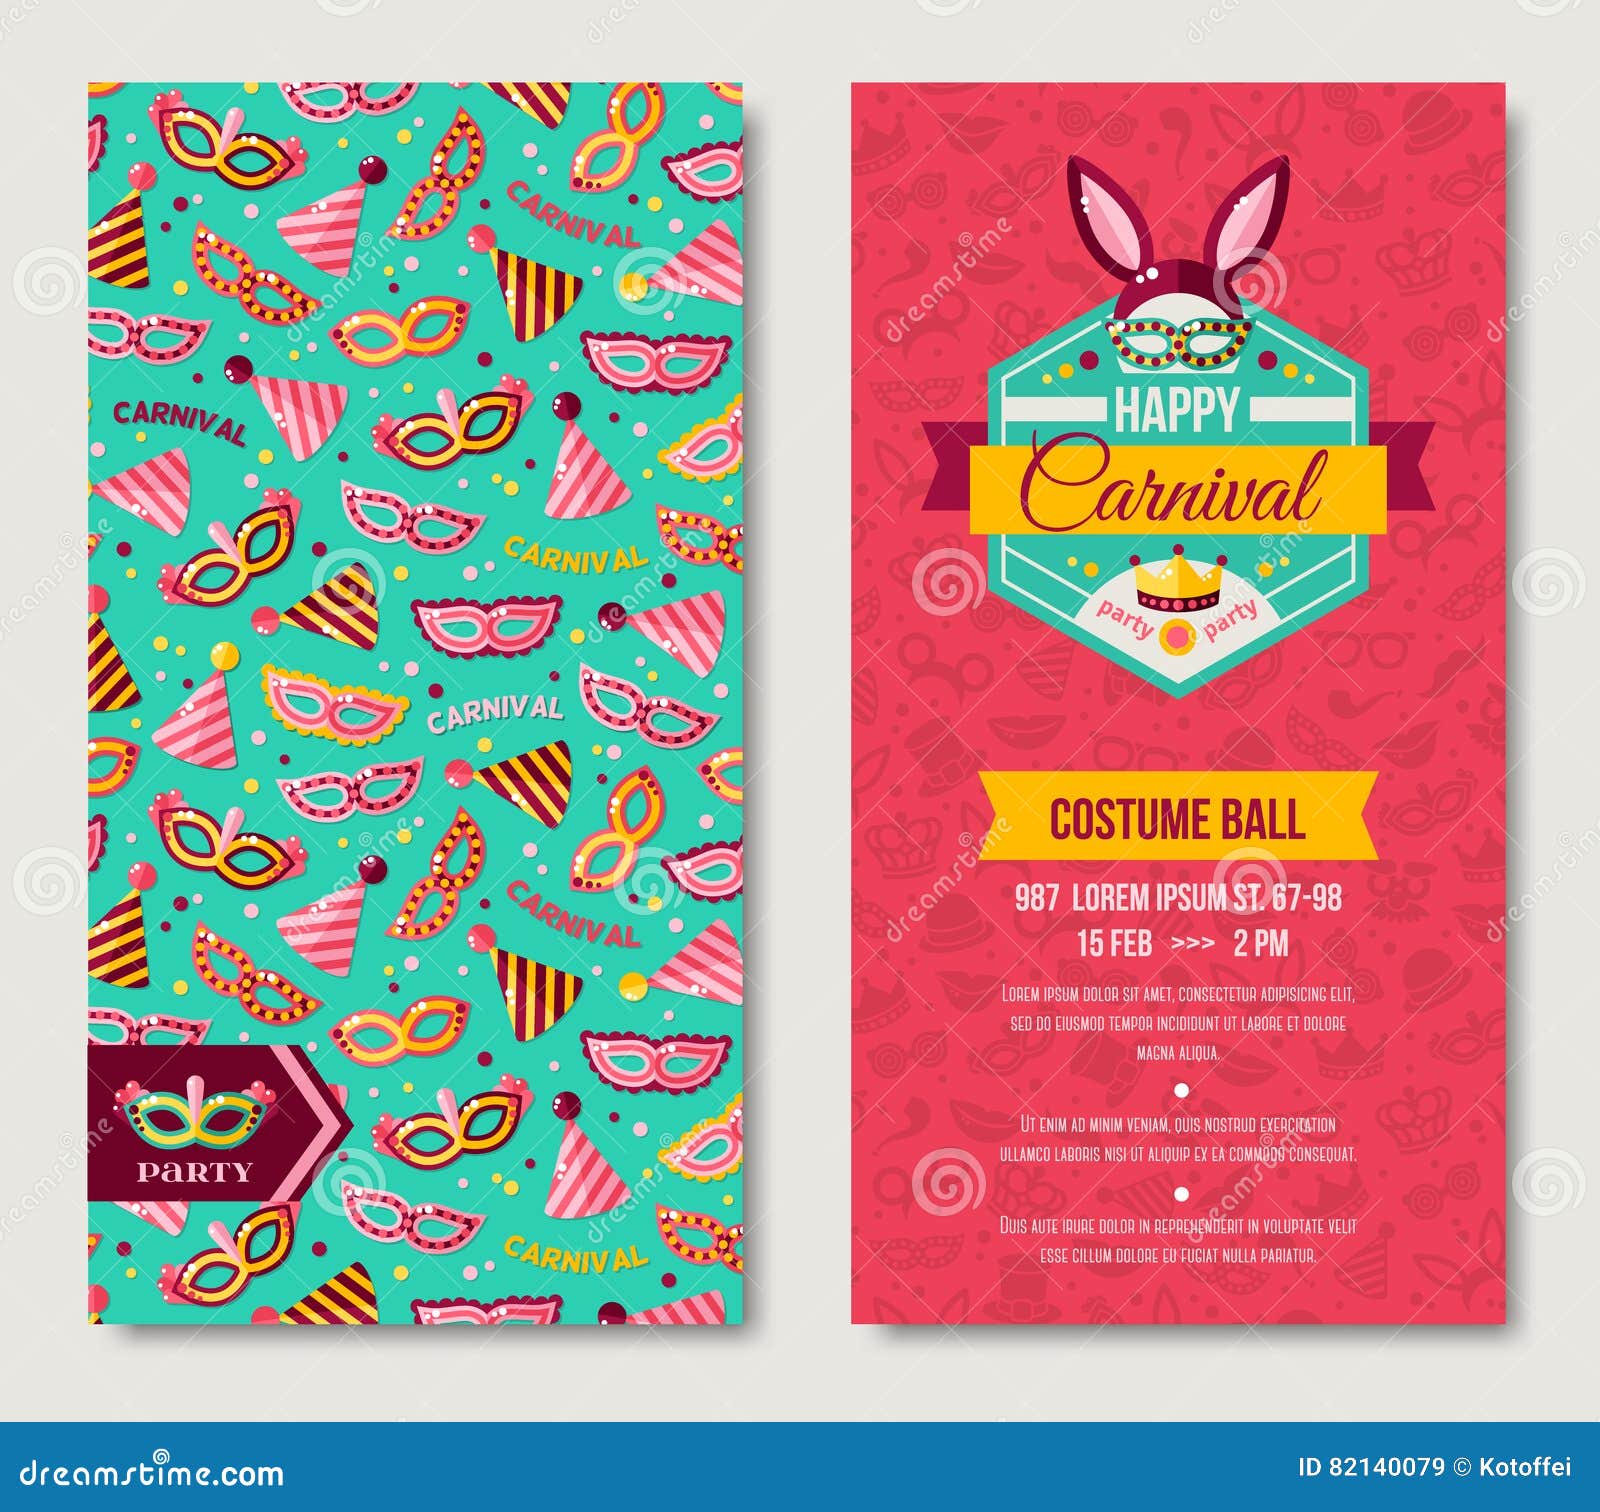 Carnival Ticket Images – Browse 16,733 Stock Photos, Vectors, and